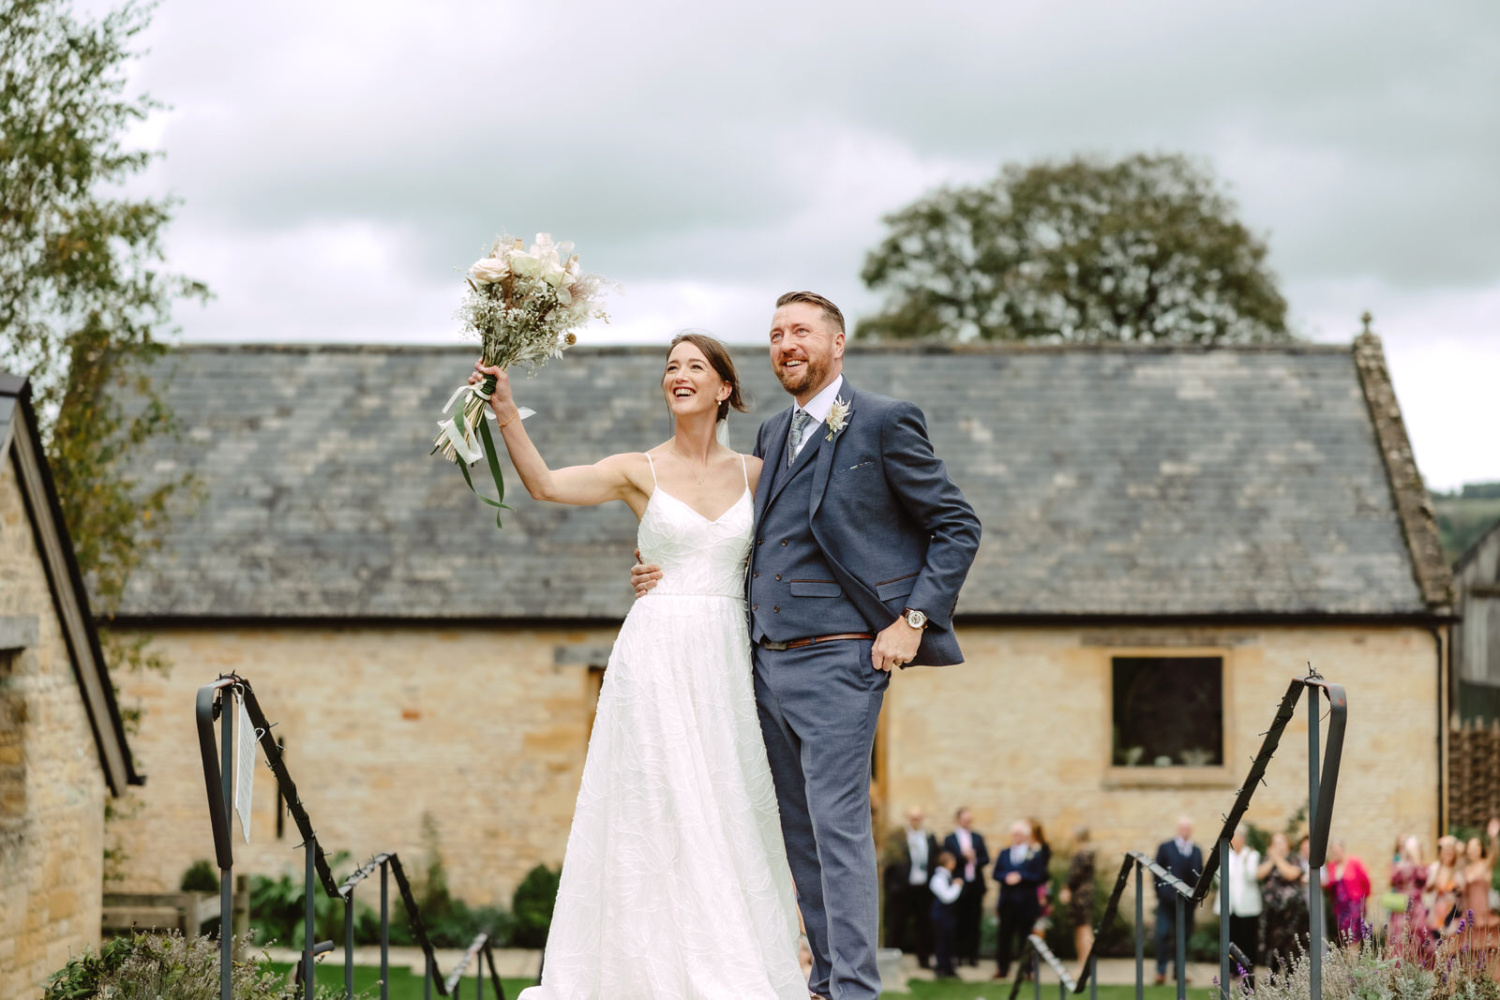 A bride and groom standing on the steps of their wedding venue. The bride is waving with her bouquet on a helicopter